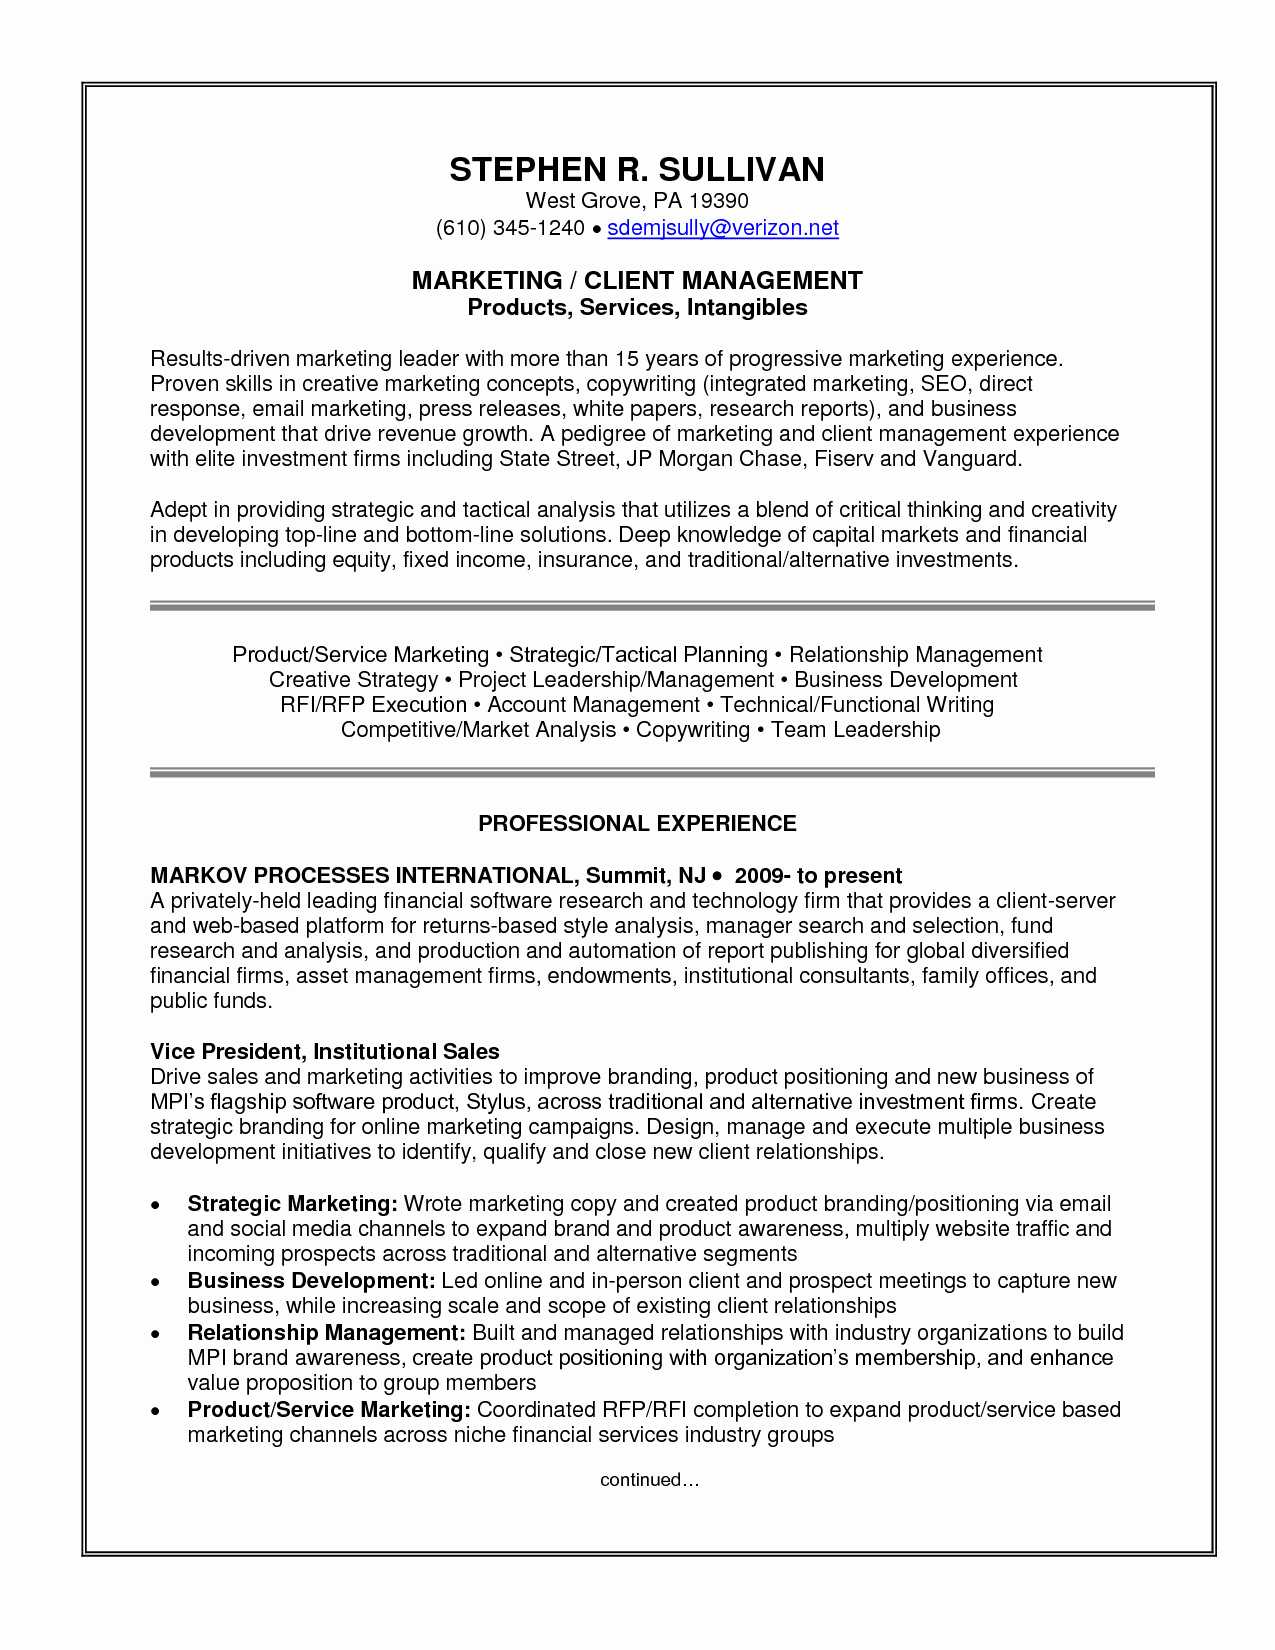 Managing A Checking Account Worksheet Answers with Resume Quick Summary